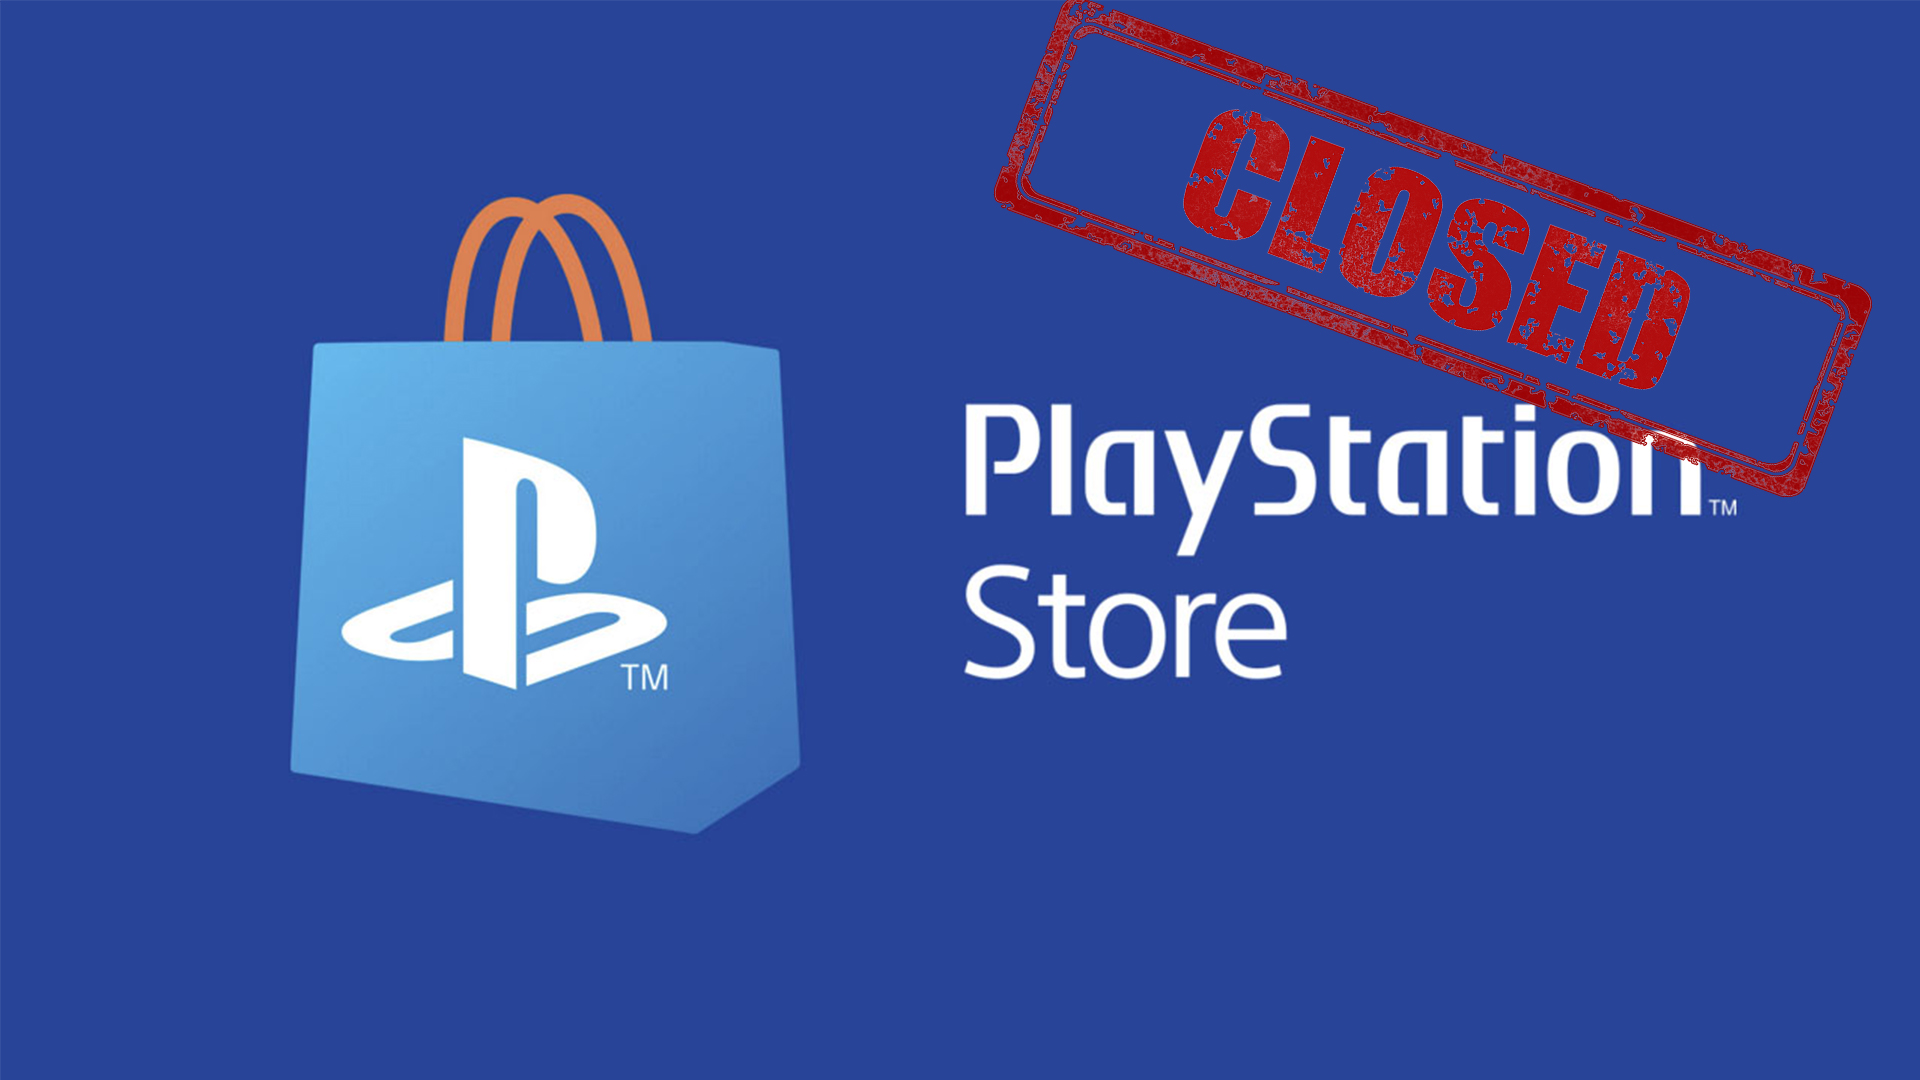 The PSP store closes today, but it looks like games will still be available  on PS3 and Vita